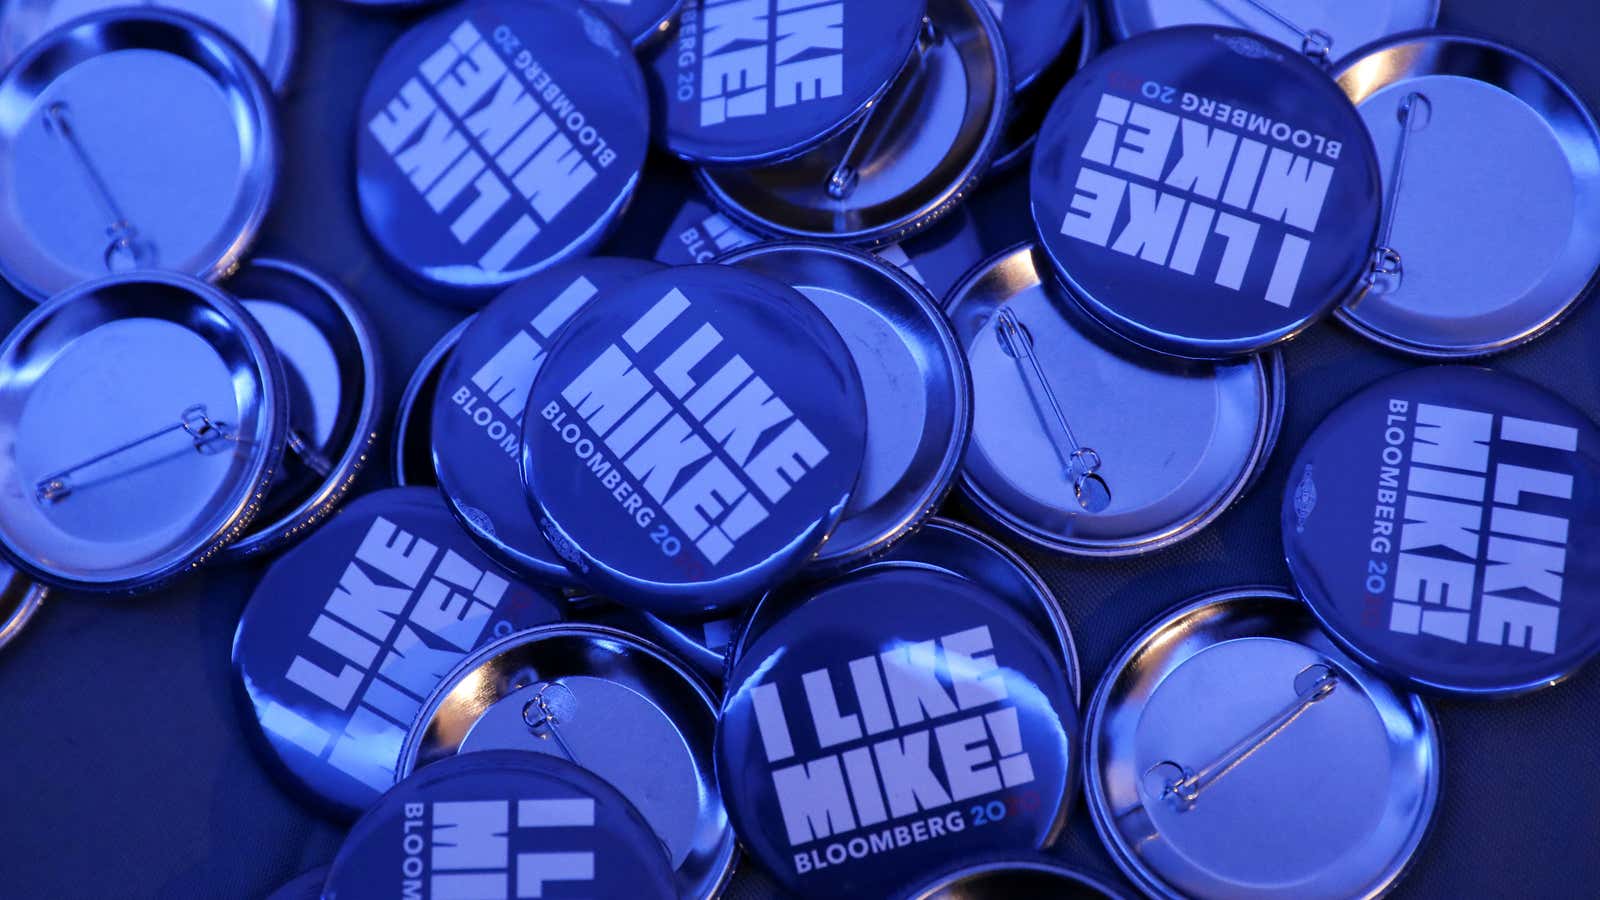 Campaign buttons for Democratic presidential candidate and billionaire Michael Bloomberg.